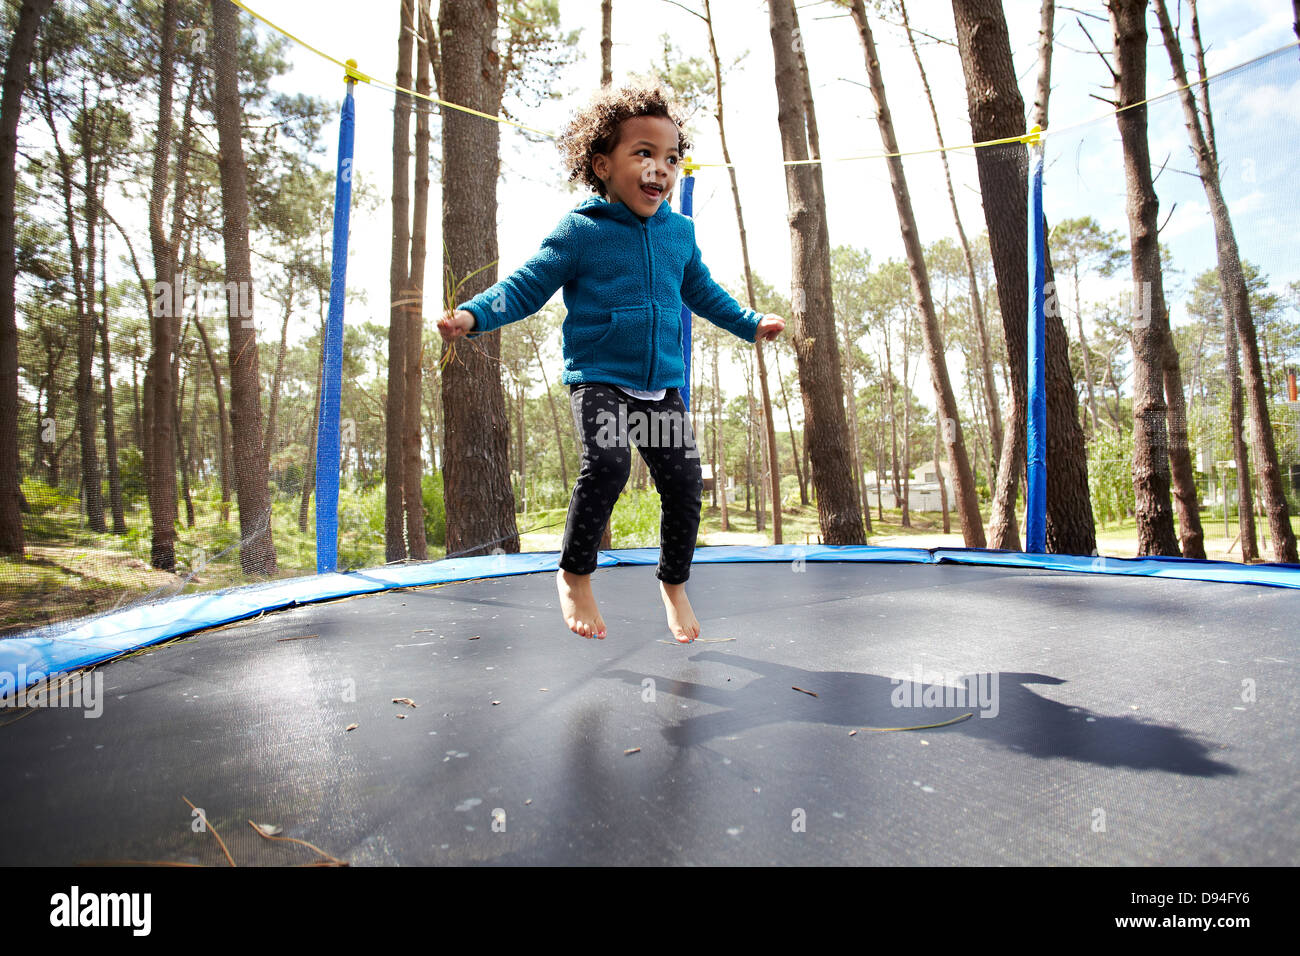 Mixed race girl jumping on trampoline Stock Photo